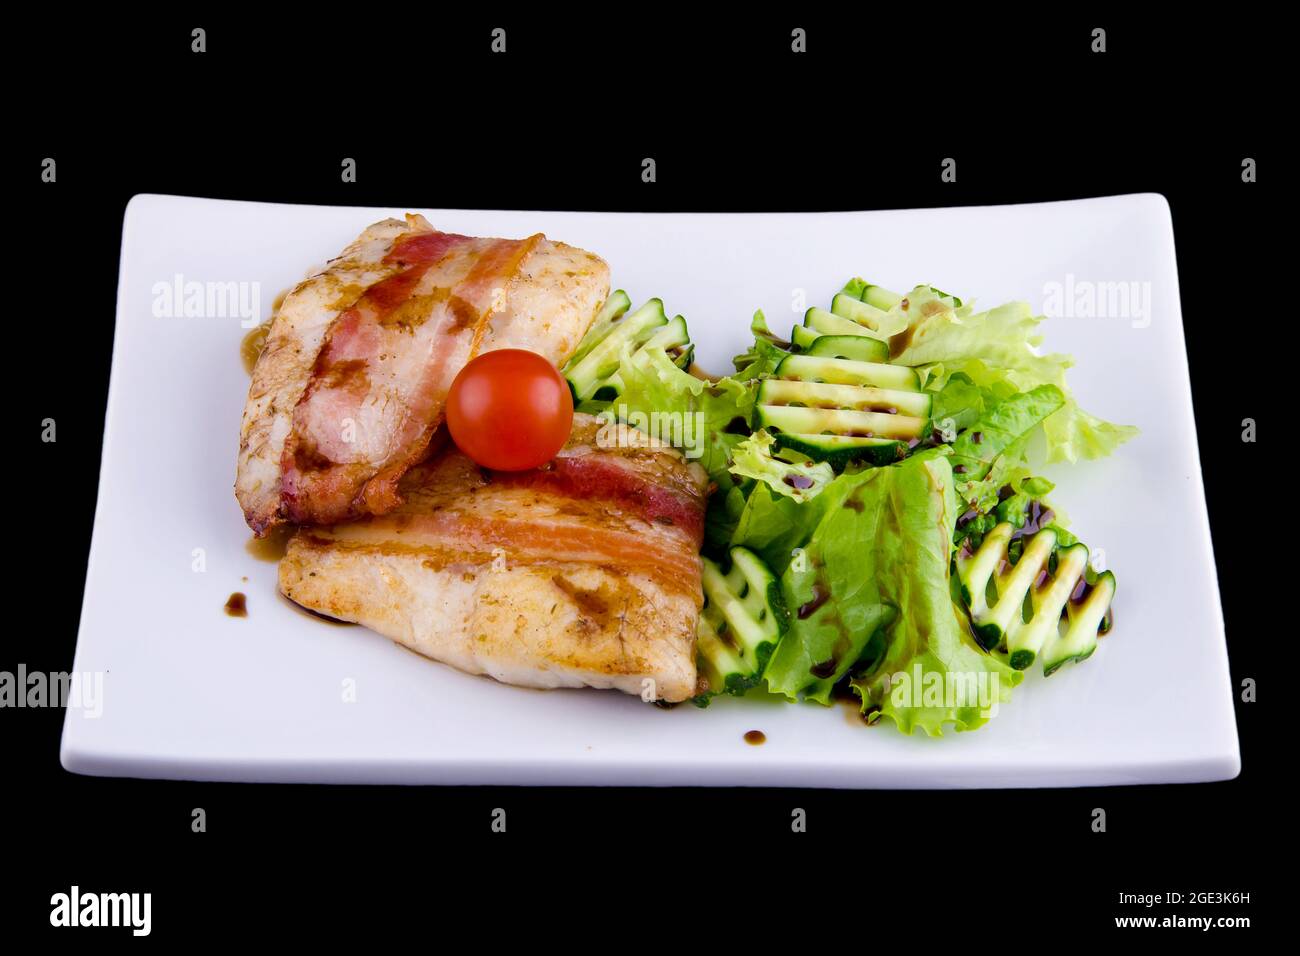 Delicious Baked Zander Fillet On A Plate Stock Photo - Download Image Now -  Fish, Fillet, Walleye - iStock